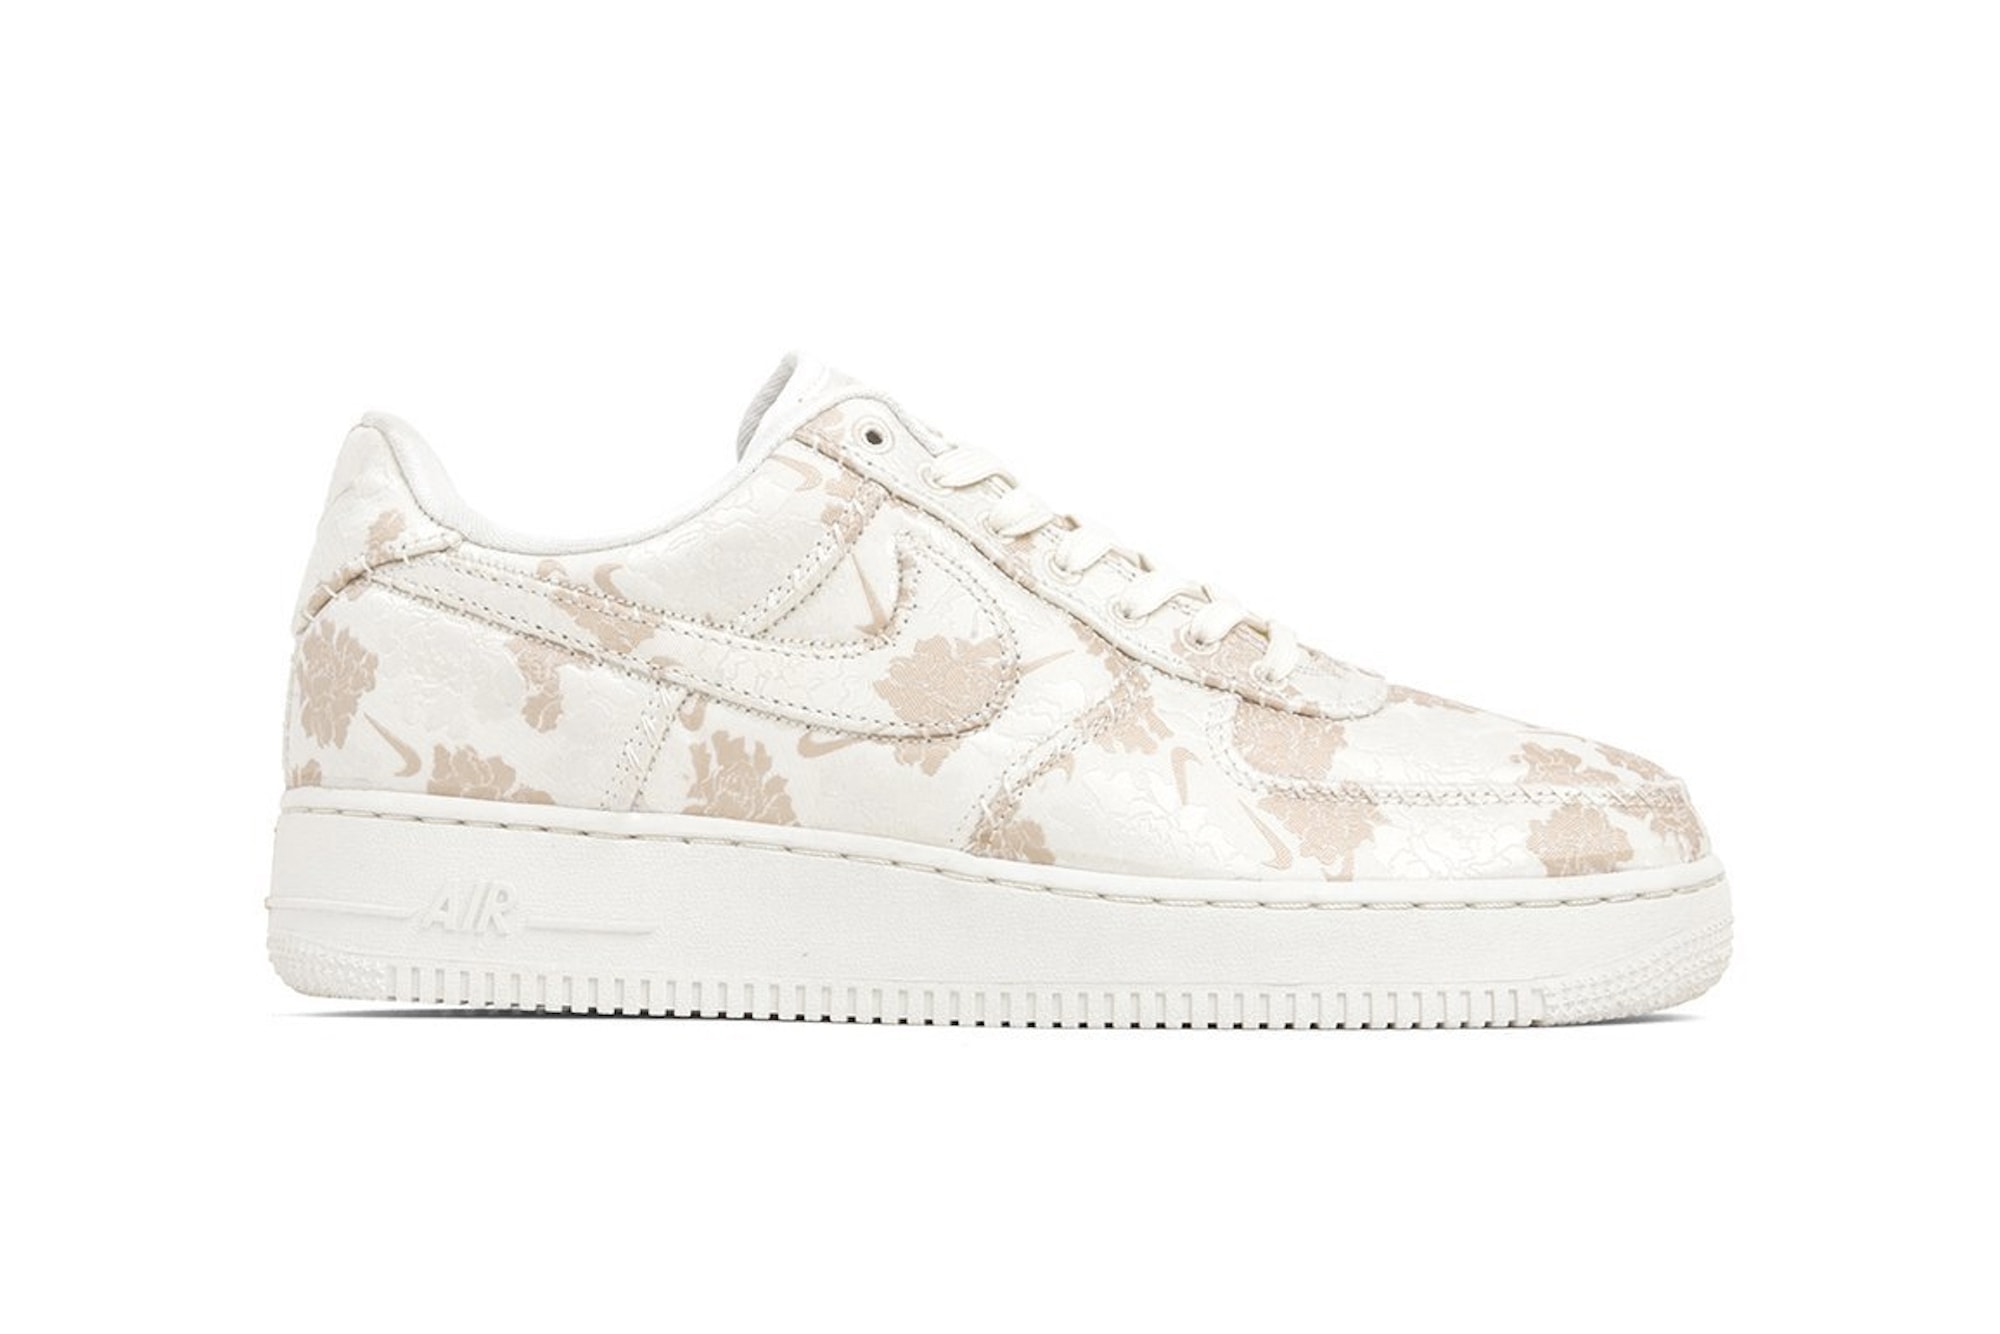 Nike Air Force 1 Premium "Sail/Ivory/Guava Ice" Spring Summer Sneaker Shoe Trainer Release White Pattern Floral